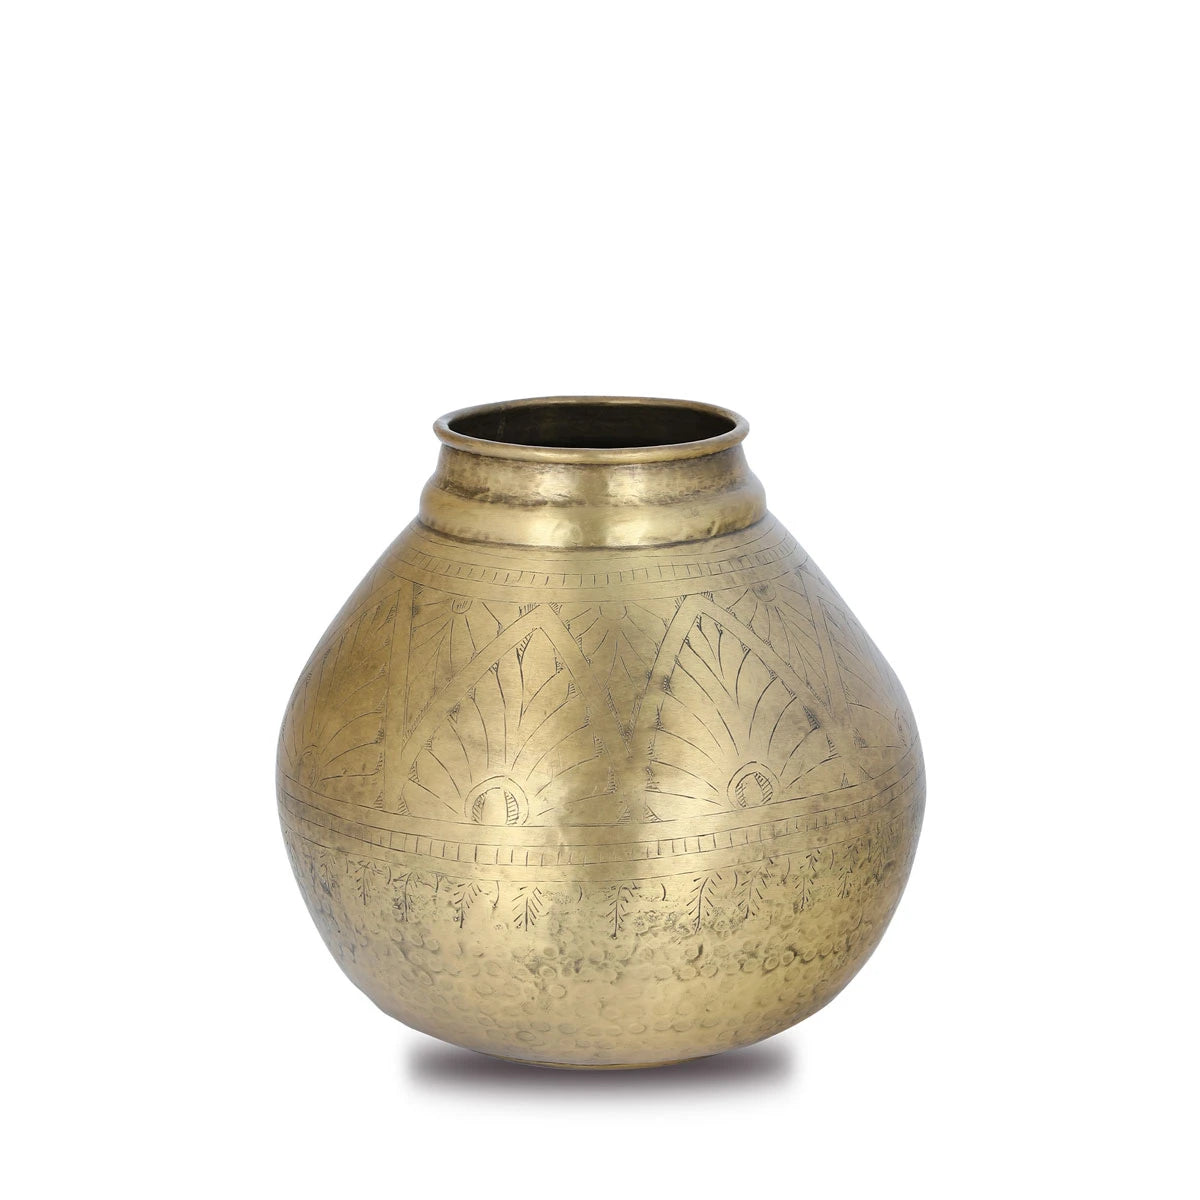 Front View of Golden Colored Decorative Brass Metal Jar